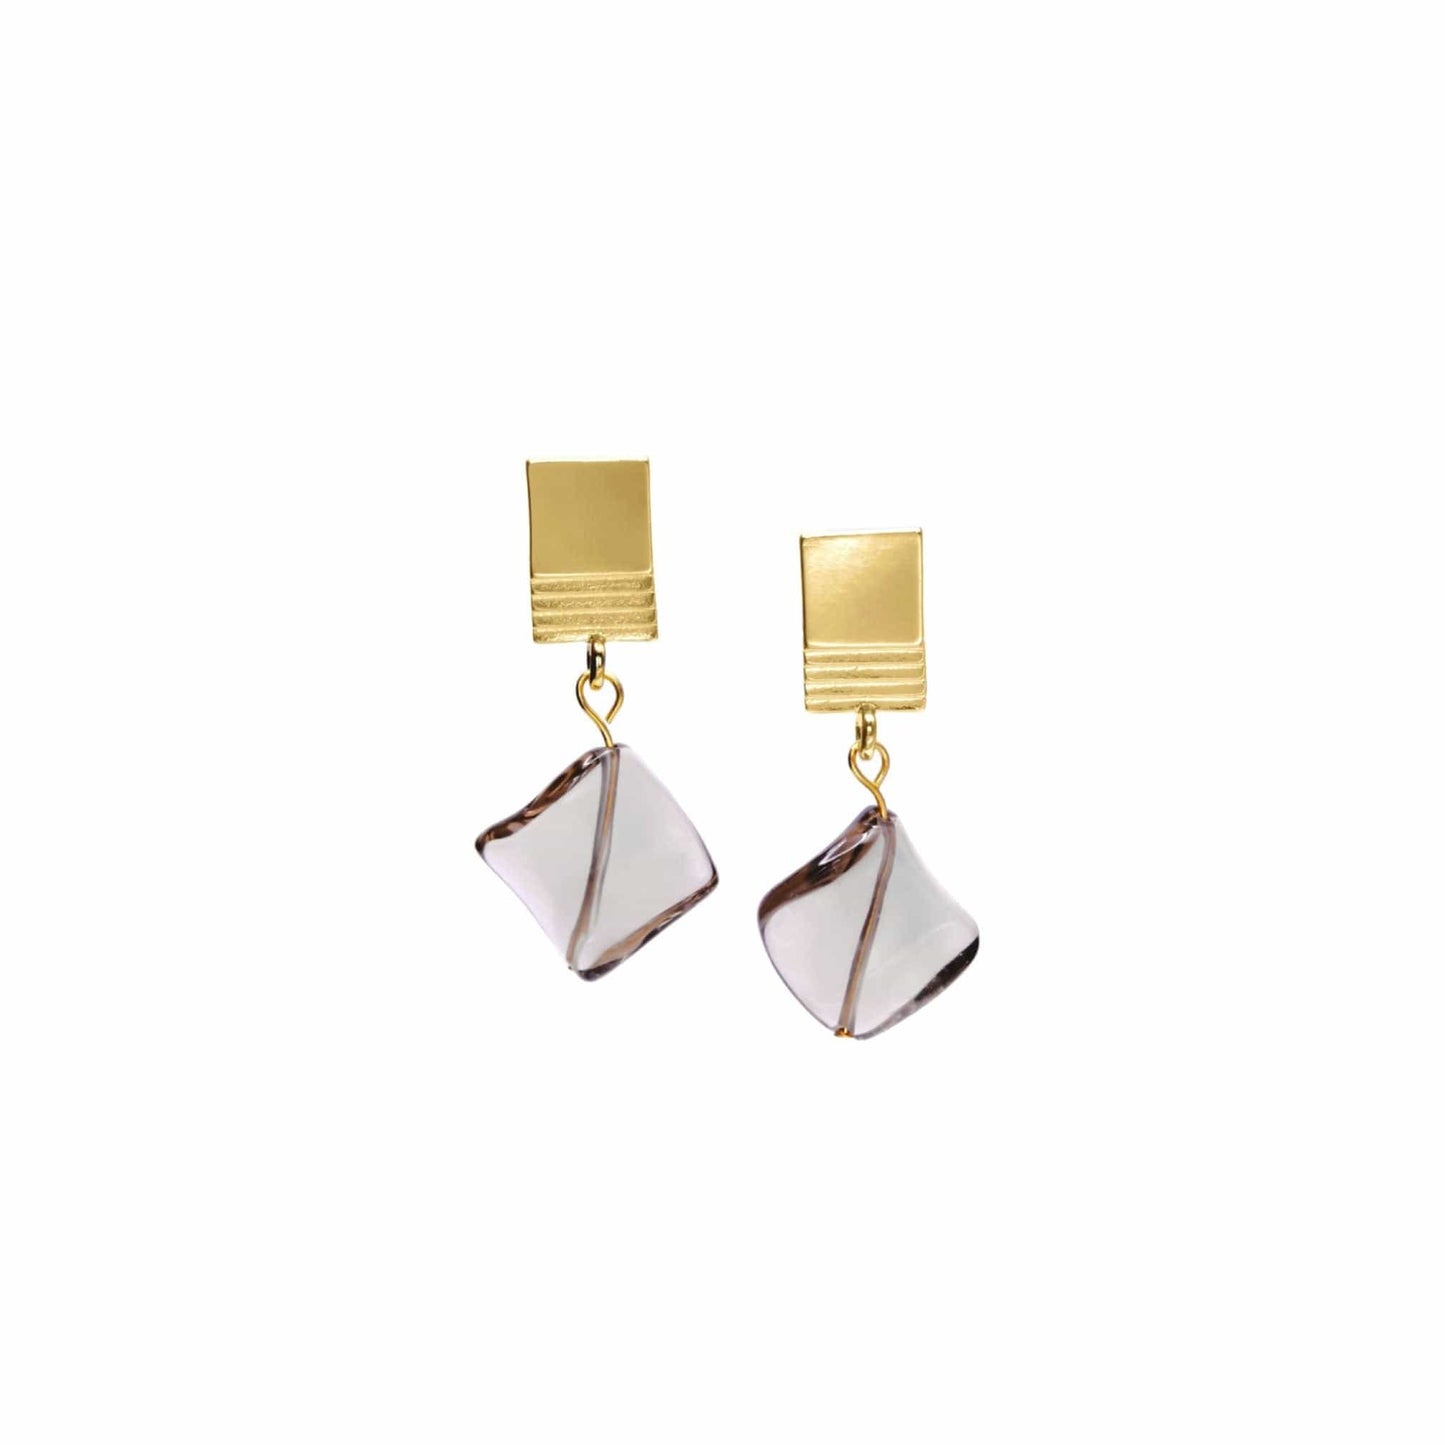 VUE by SEK Earrings gold layered square + twisted smoky quartz earrings